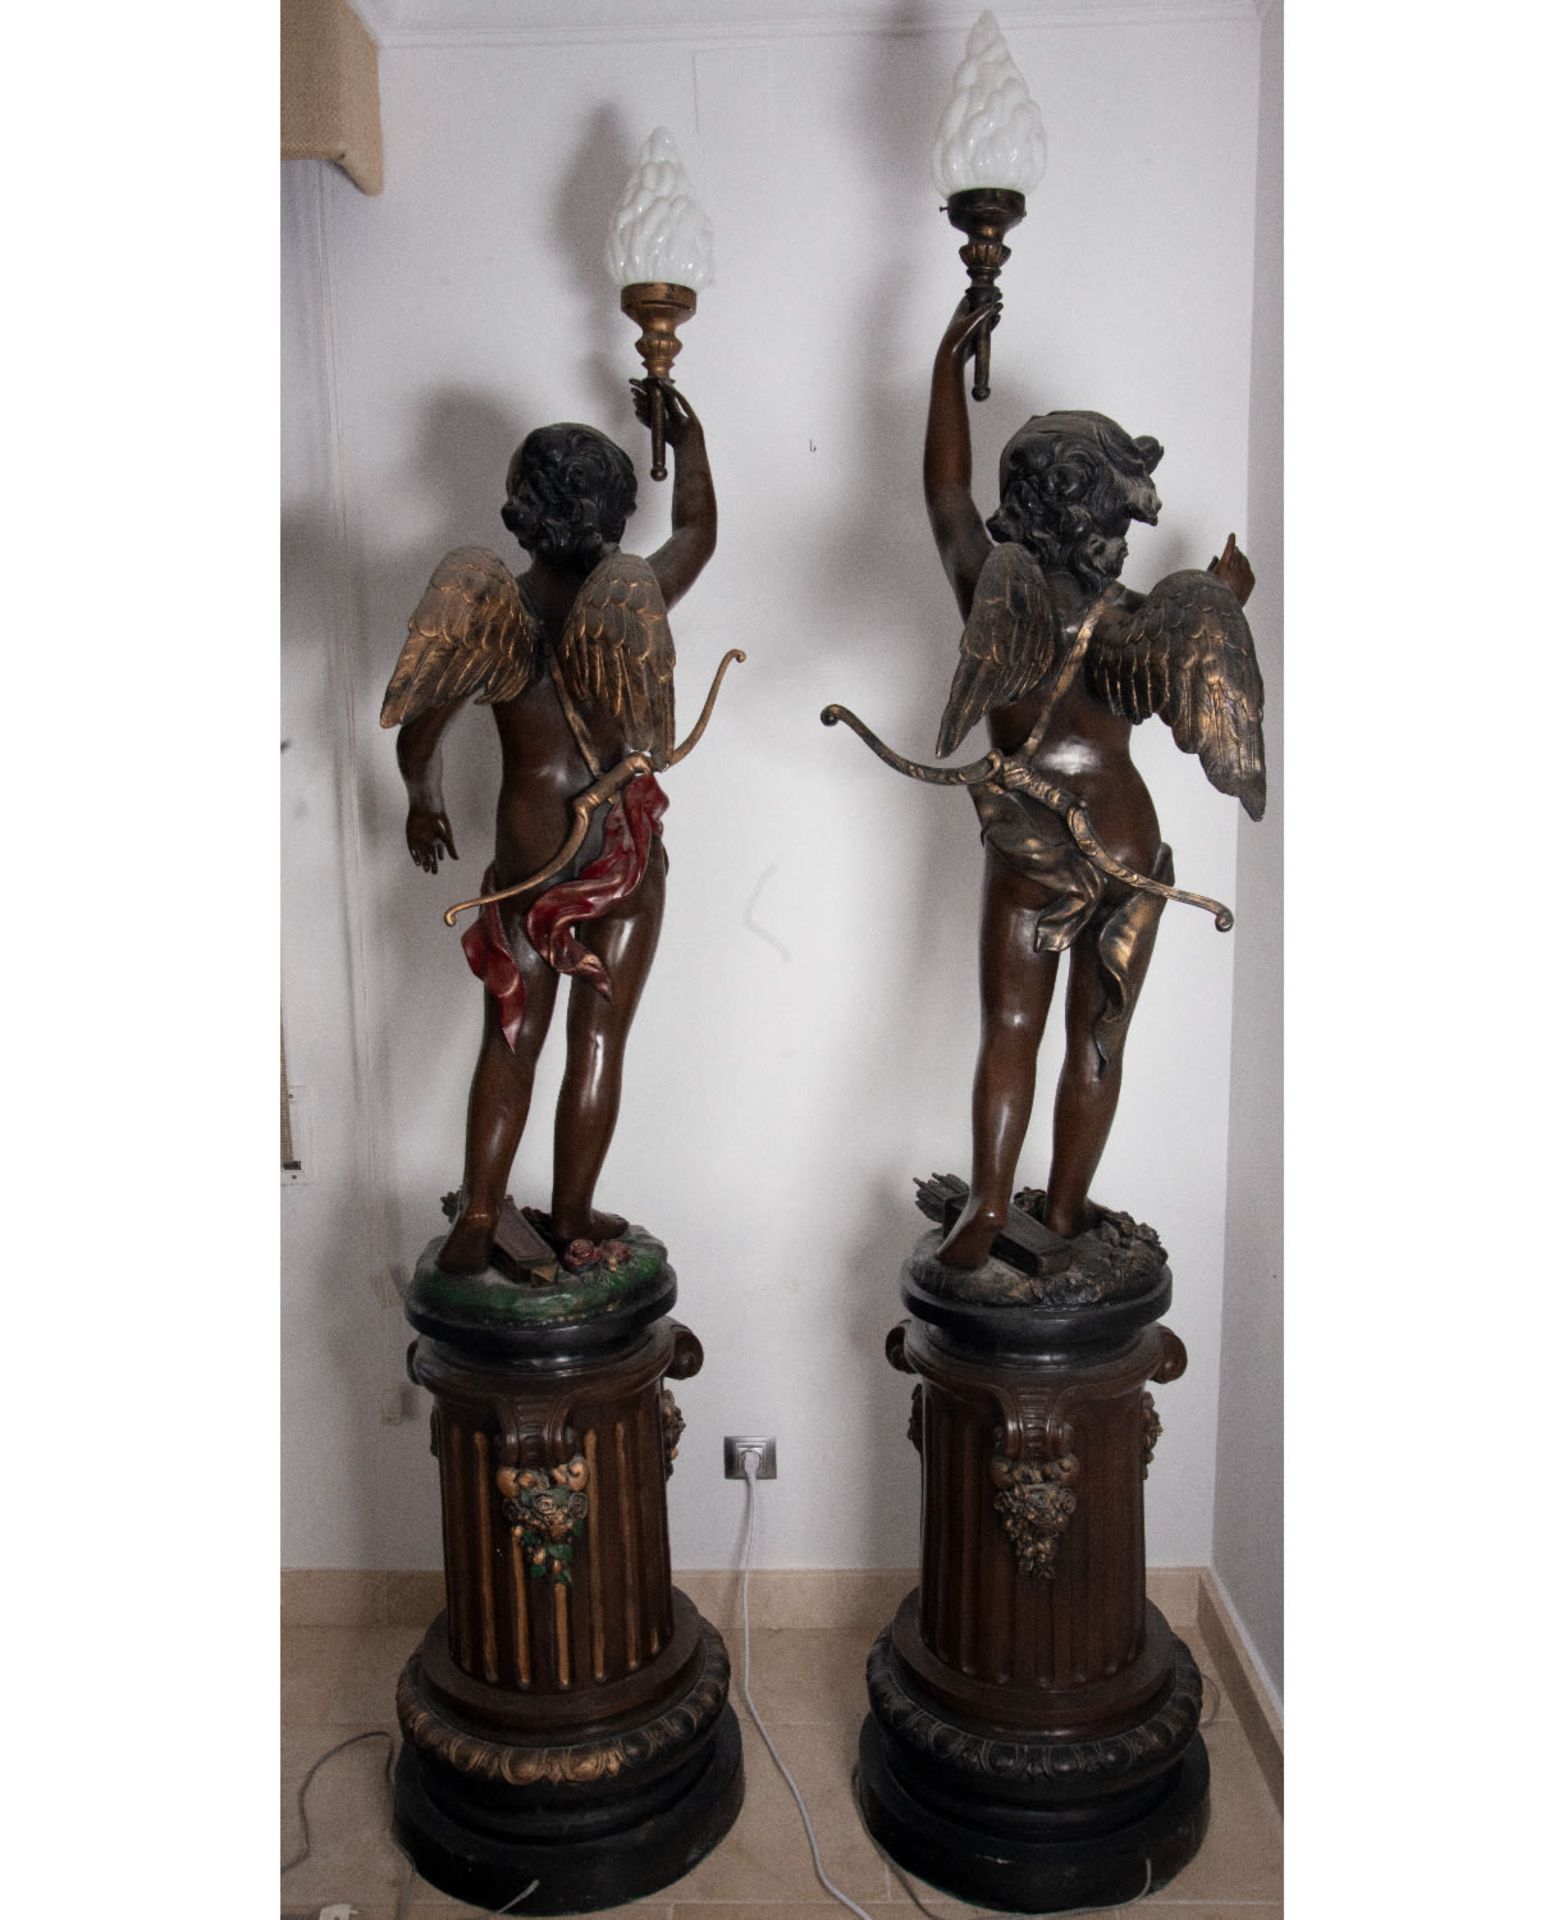 Pair of large bronze torch-bearing angels, French school from the late 19th century, around 1880 - Image 2 of 2